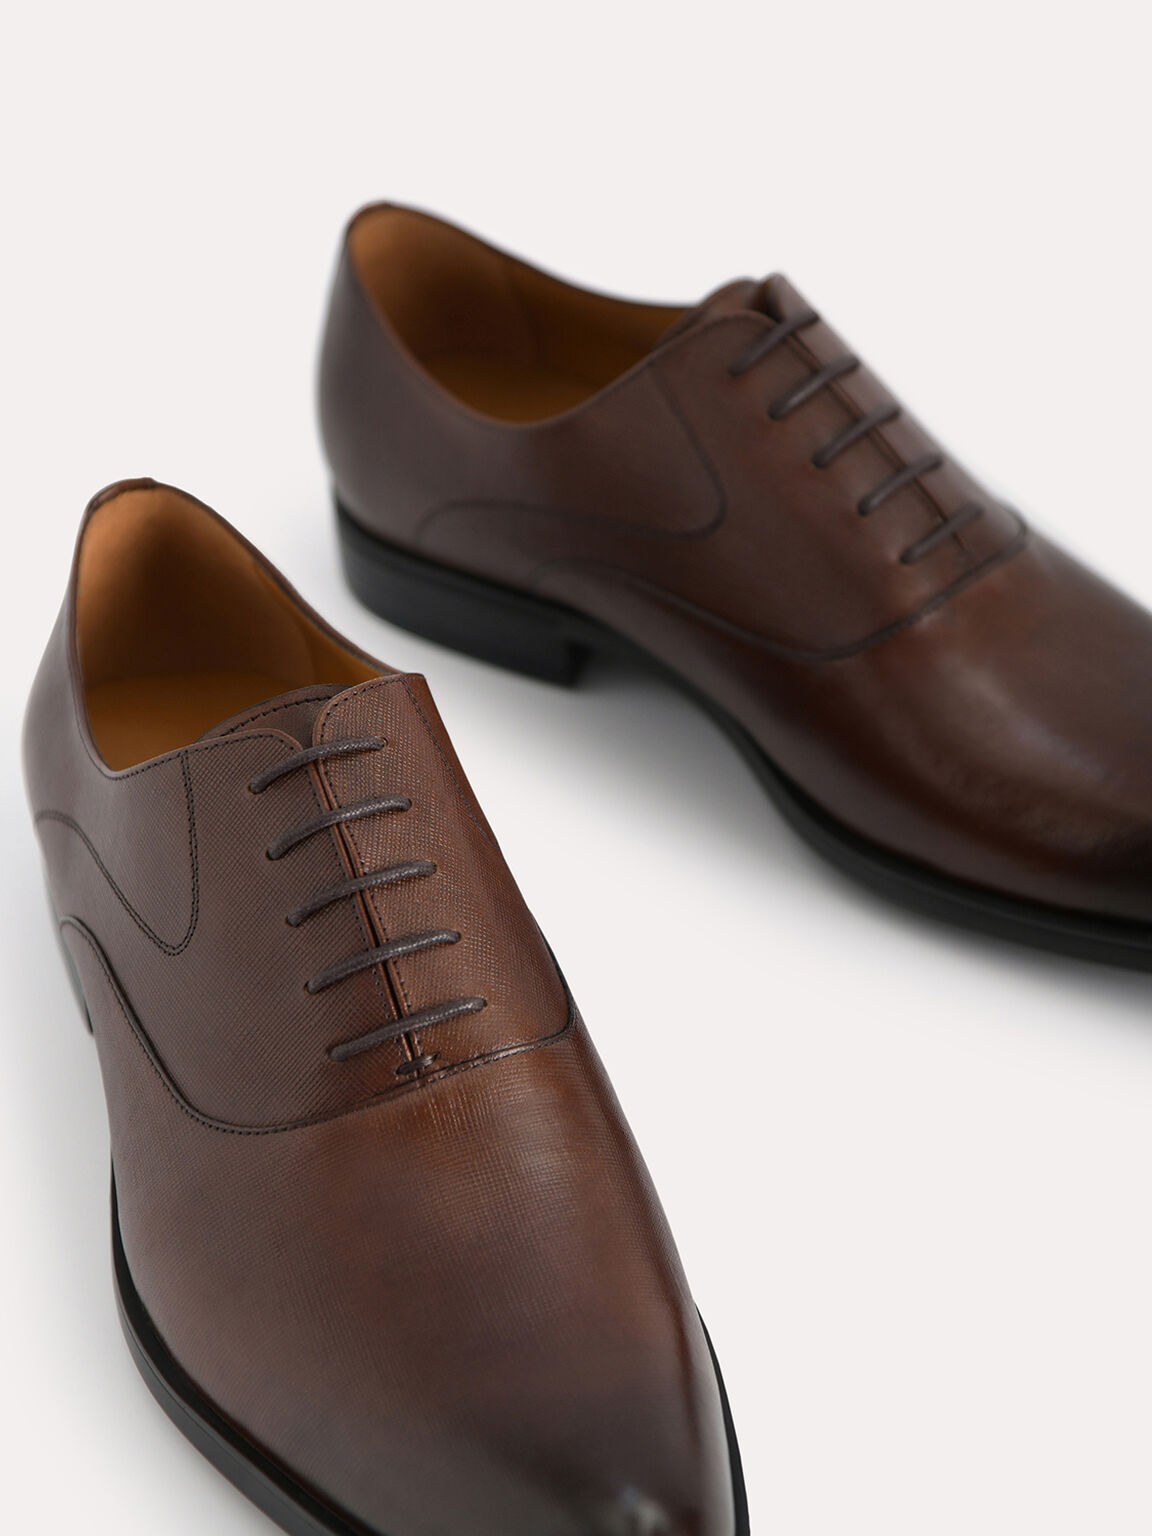 Textured Leather Oxfords, Brown, hi-res